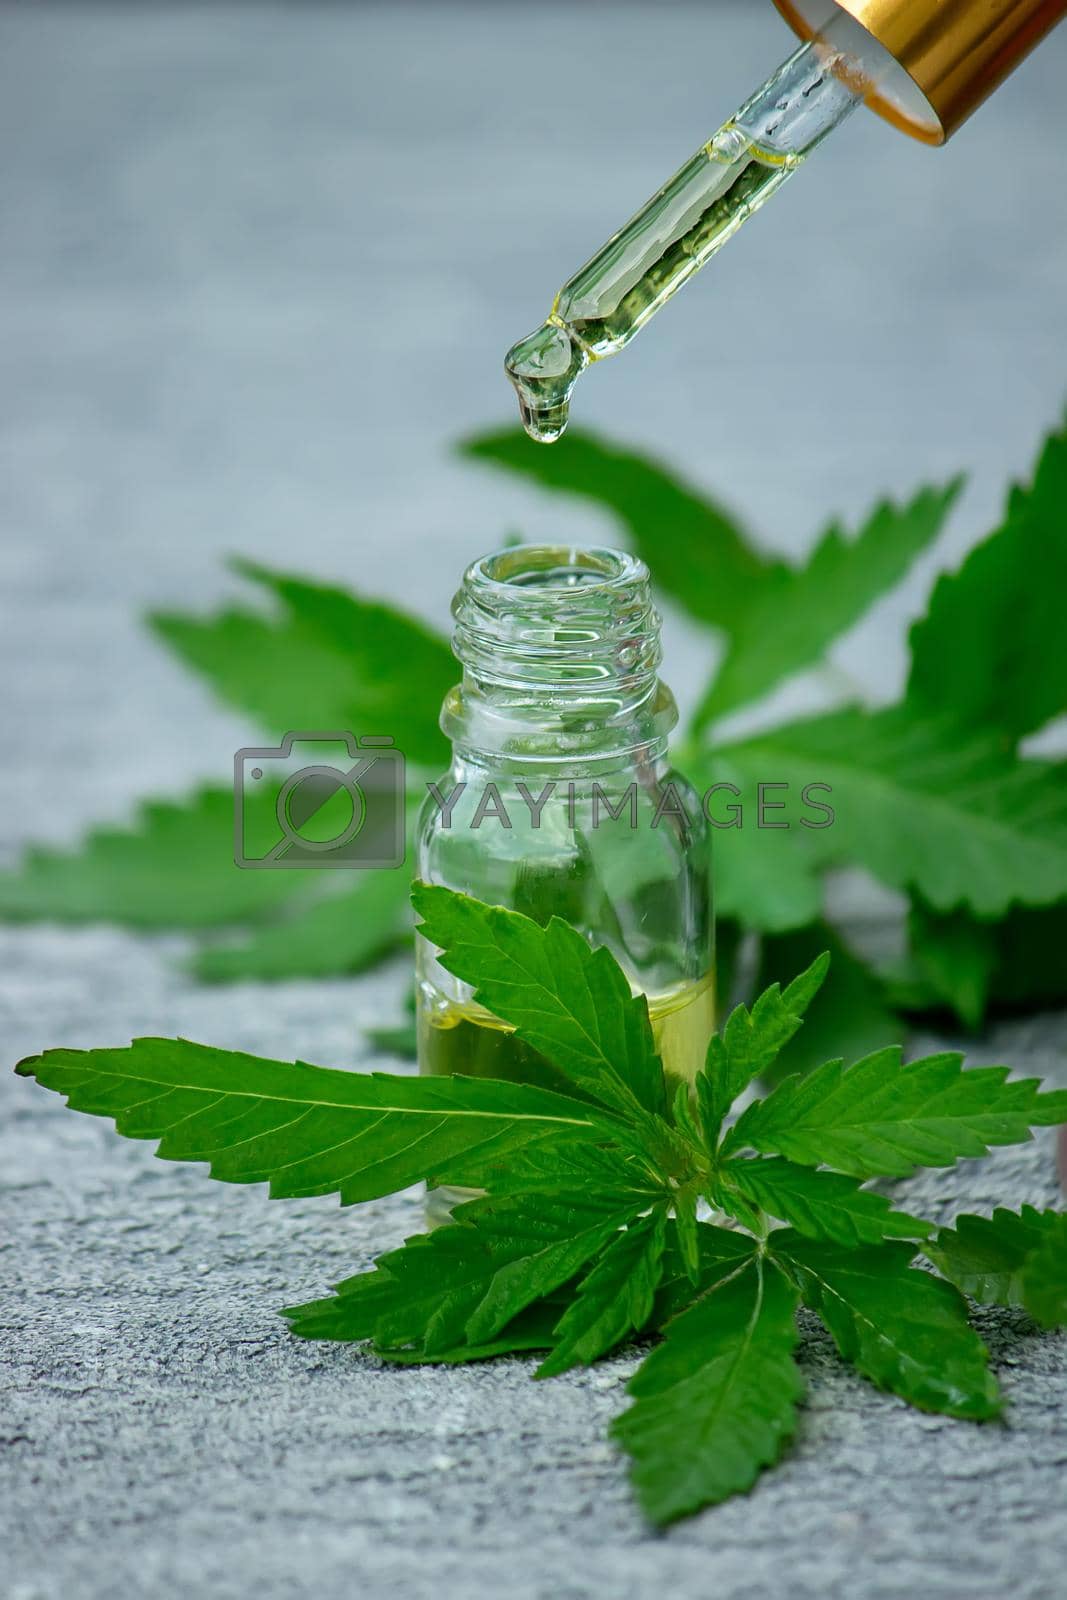 Royalty free image of Cannabis herb and leaves for treatment broth, tincture, extract, oil. by Anuta23